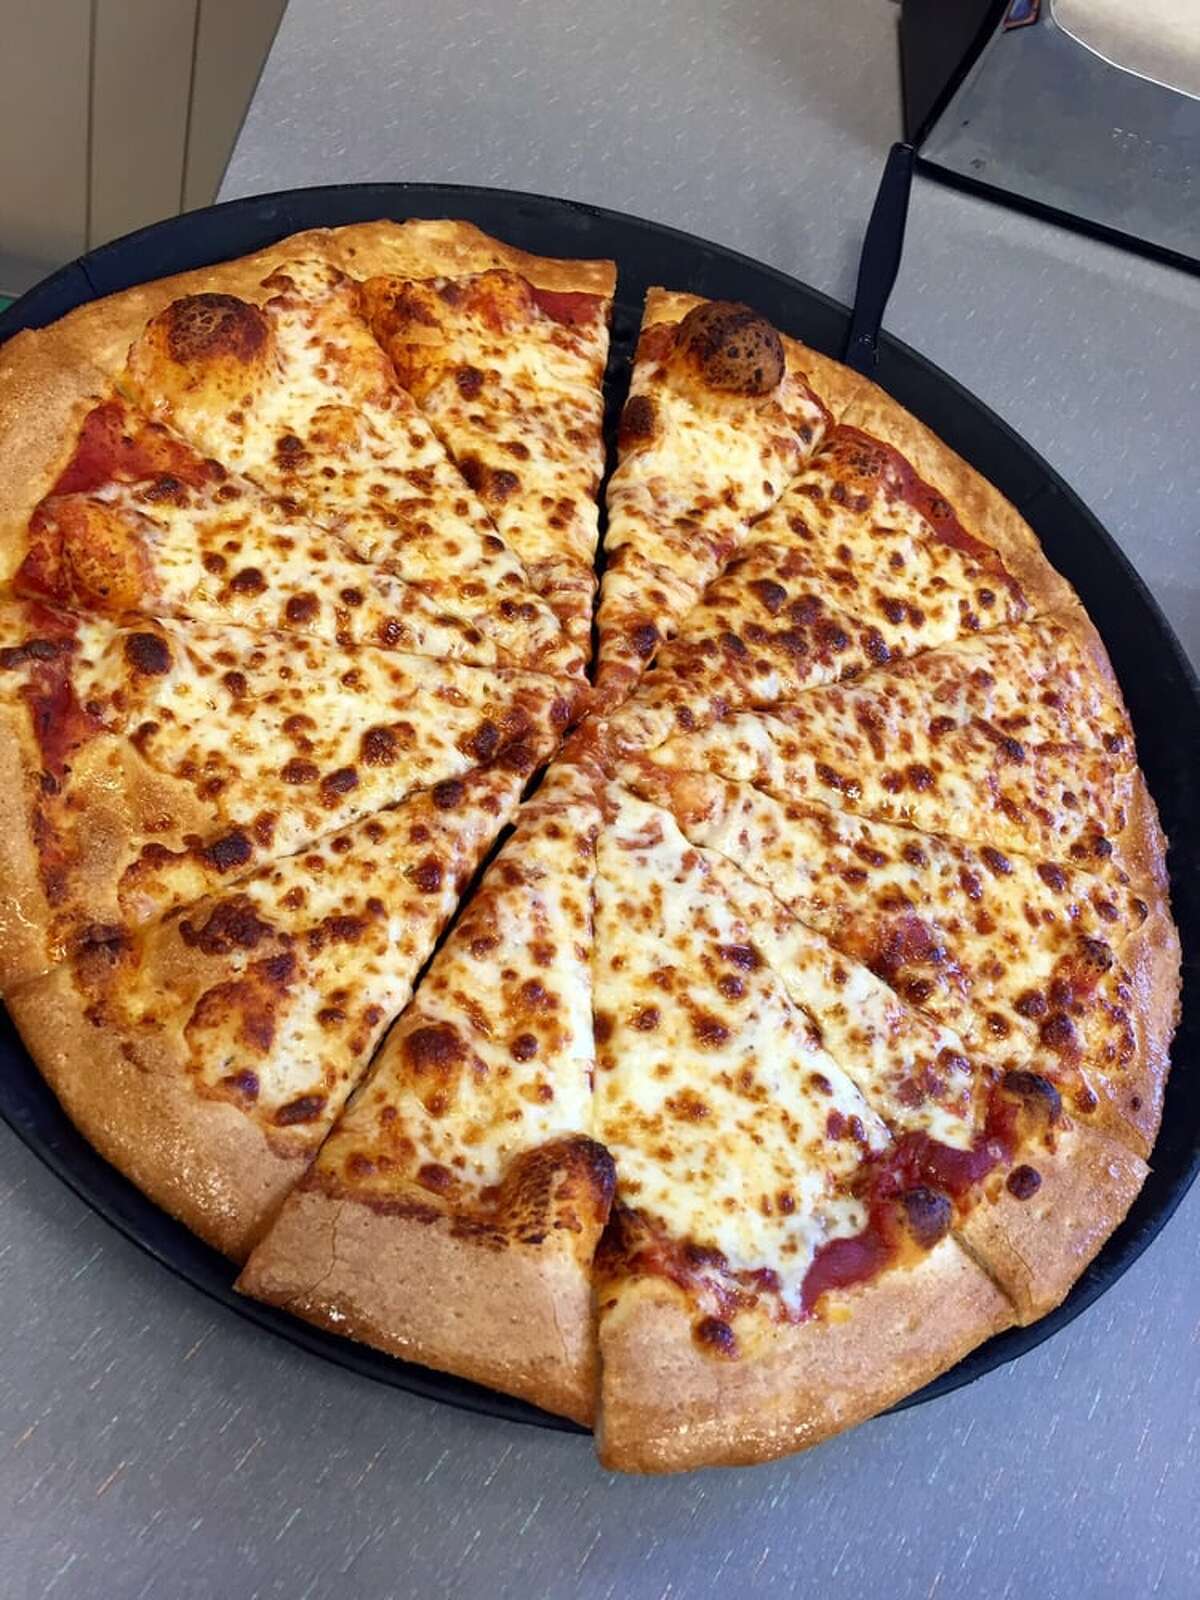 Conspiracy theory about Chuck E. Cheese pizza slices viewed by millions ...